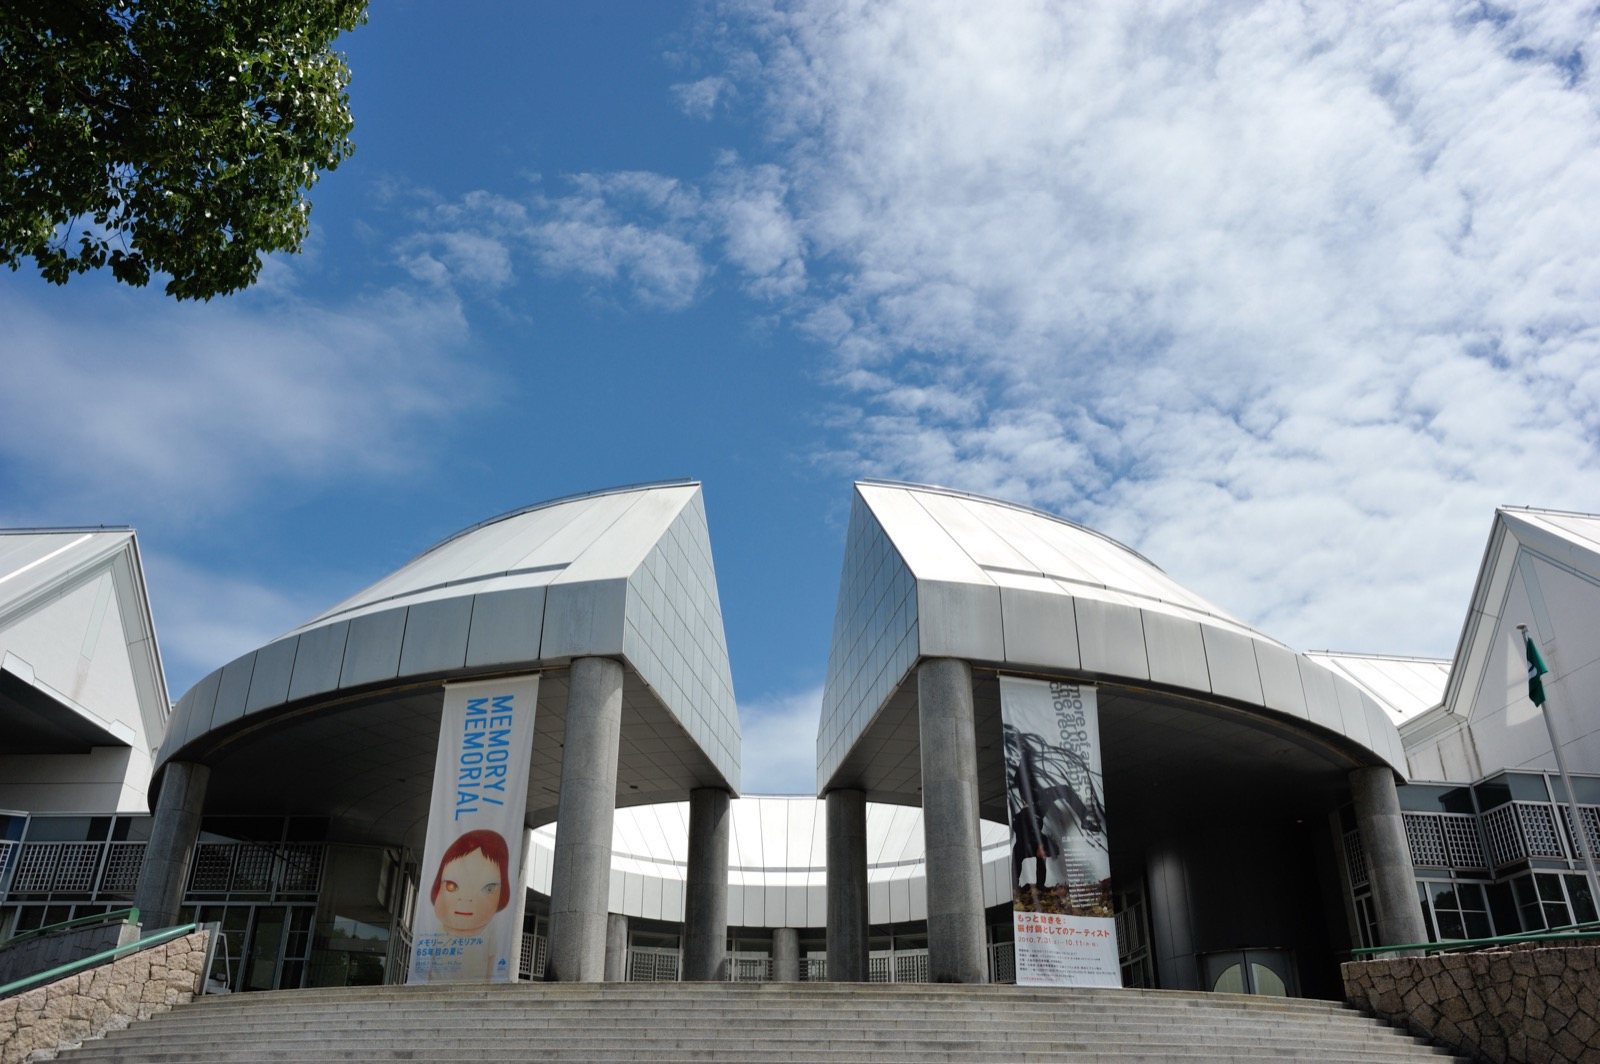 Photo of Hiroshima City Museum of Contemporary Art, Japan (Musée d'Art contemporain d'Hiroshima - MOCA - by Rog01)